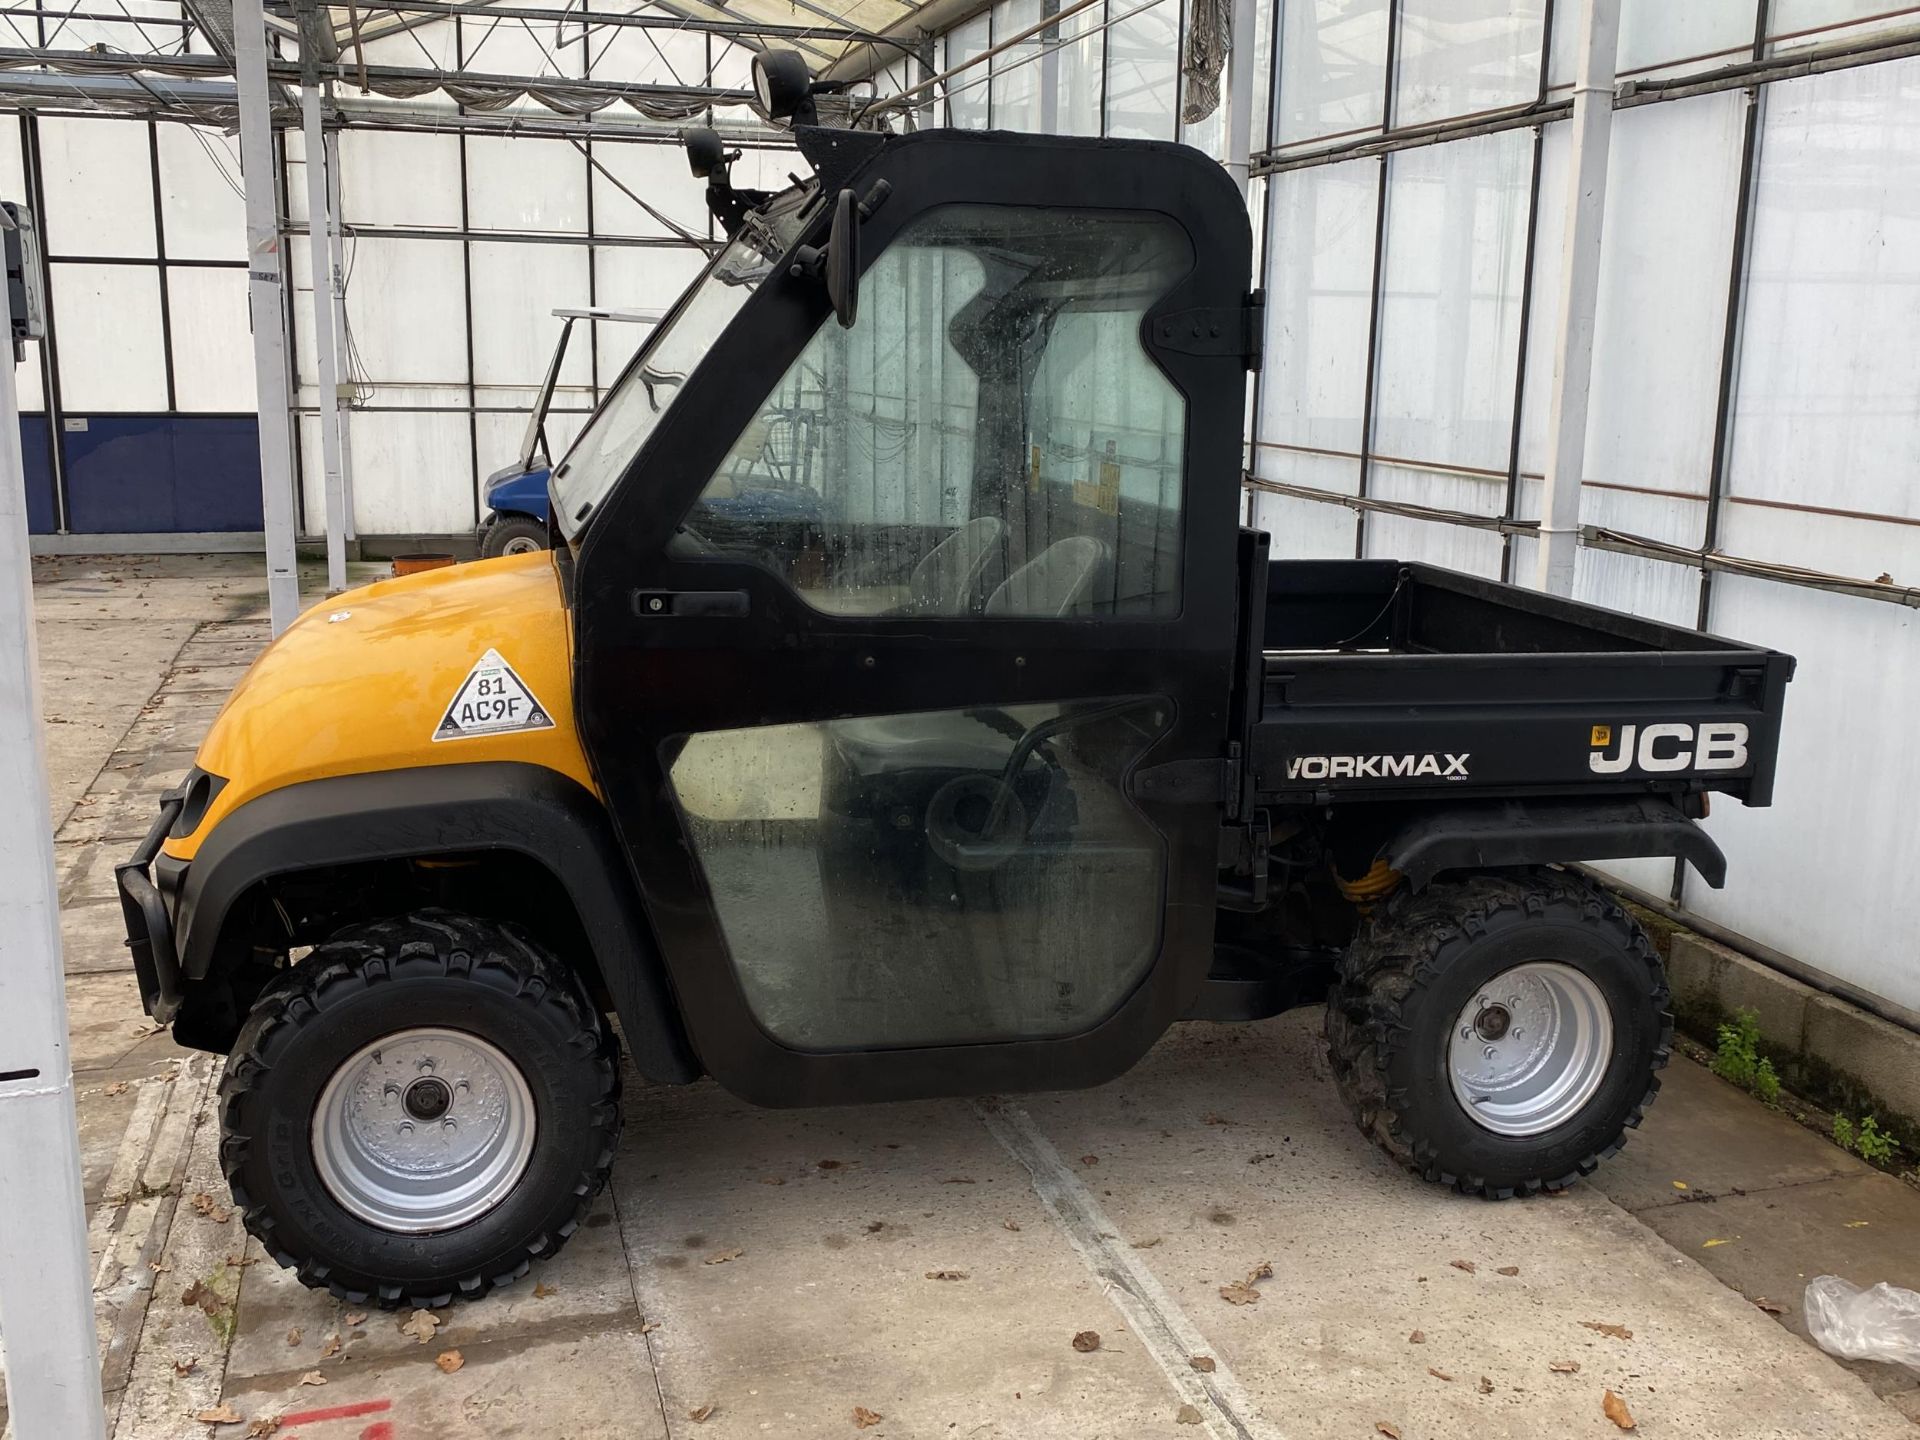 2011 JCB WORKMAX 1000D DIESEL CX11EYY OWN OWNER FROM NEW 2 NEW REAR TYRES WITH V5 LOG BOOK NO VAT - Image 3 of 7